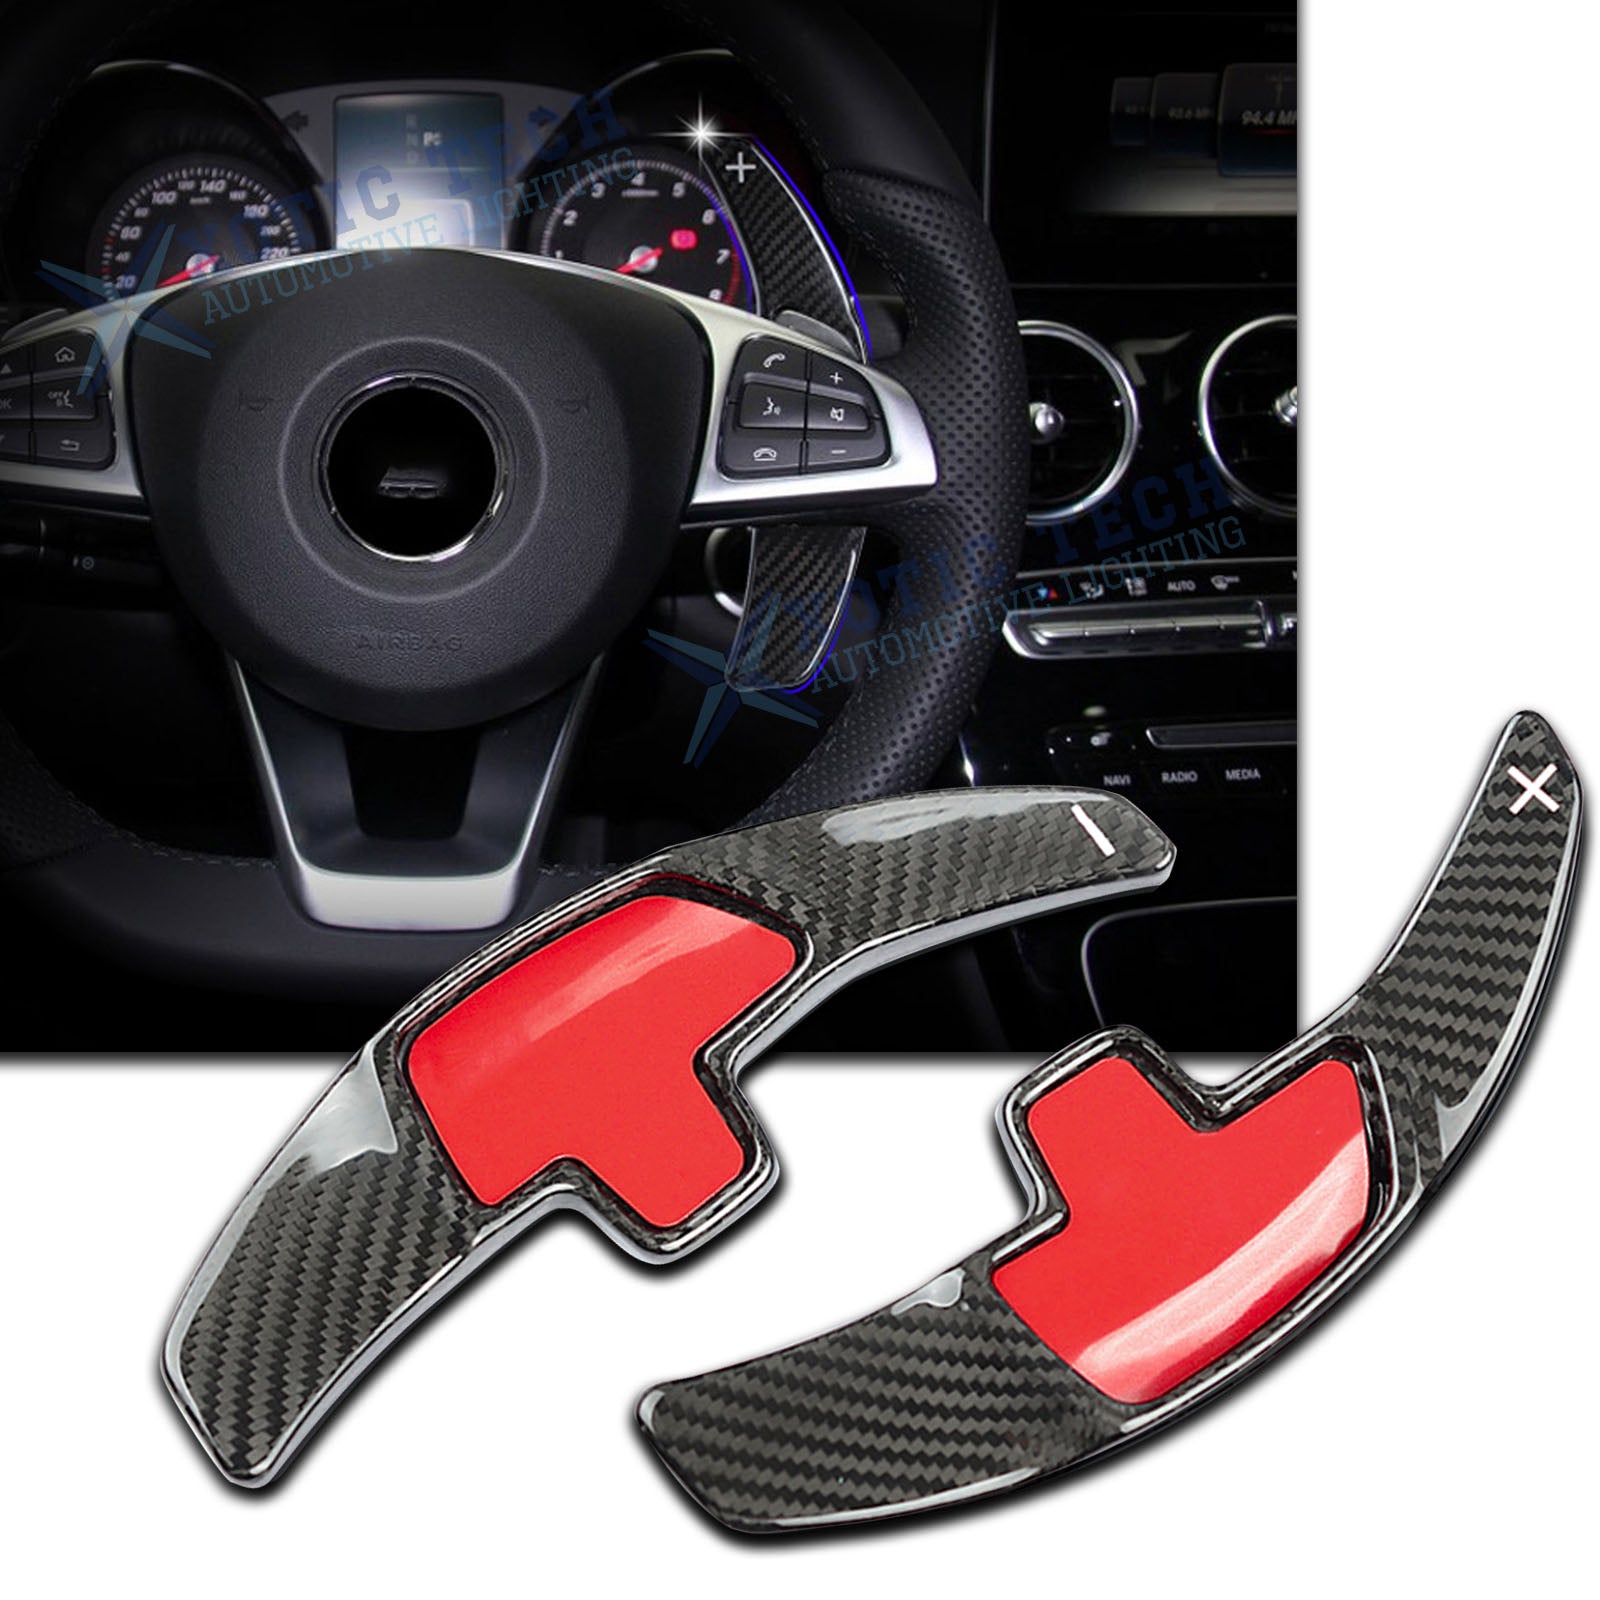 NYZAUTO Aluminum-Alloy Steering Wheel Paddle Shifter Extension Compatible  with Mercedes Benz ABE GLA GLK SLK M GL Class (Model A-Red)